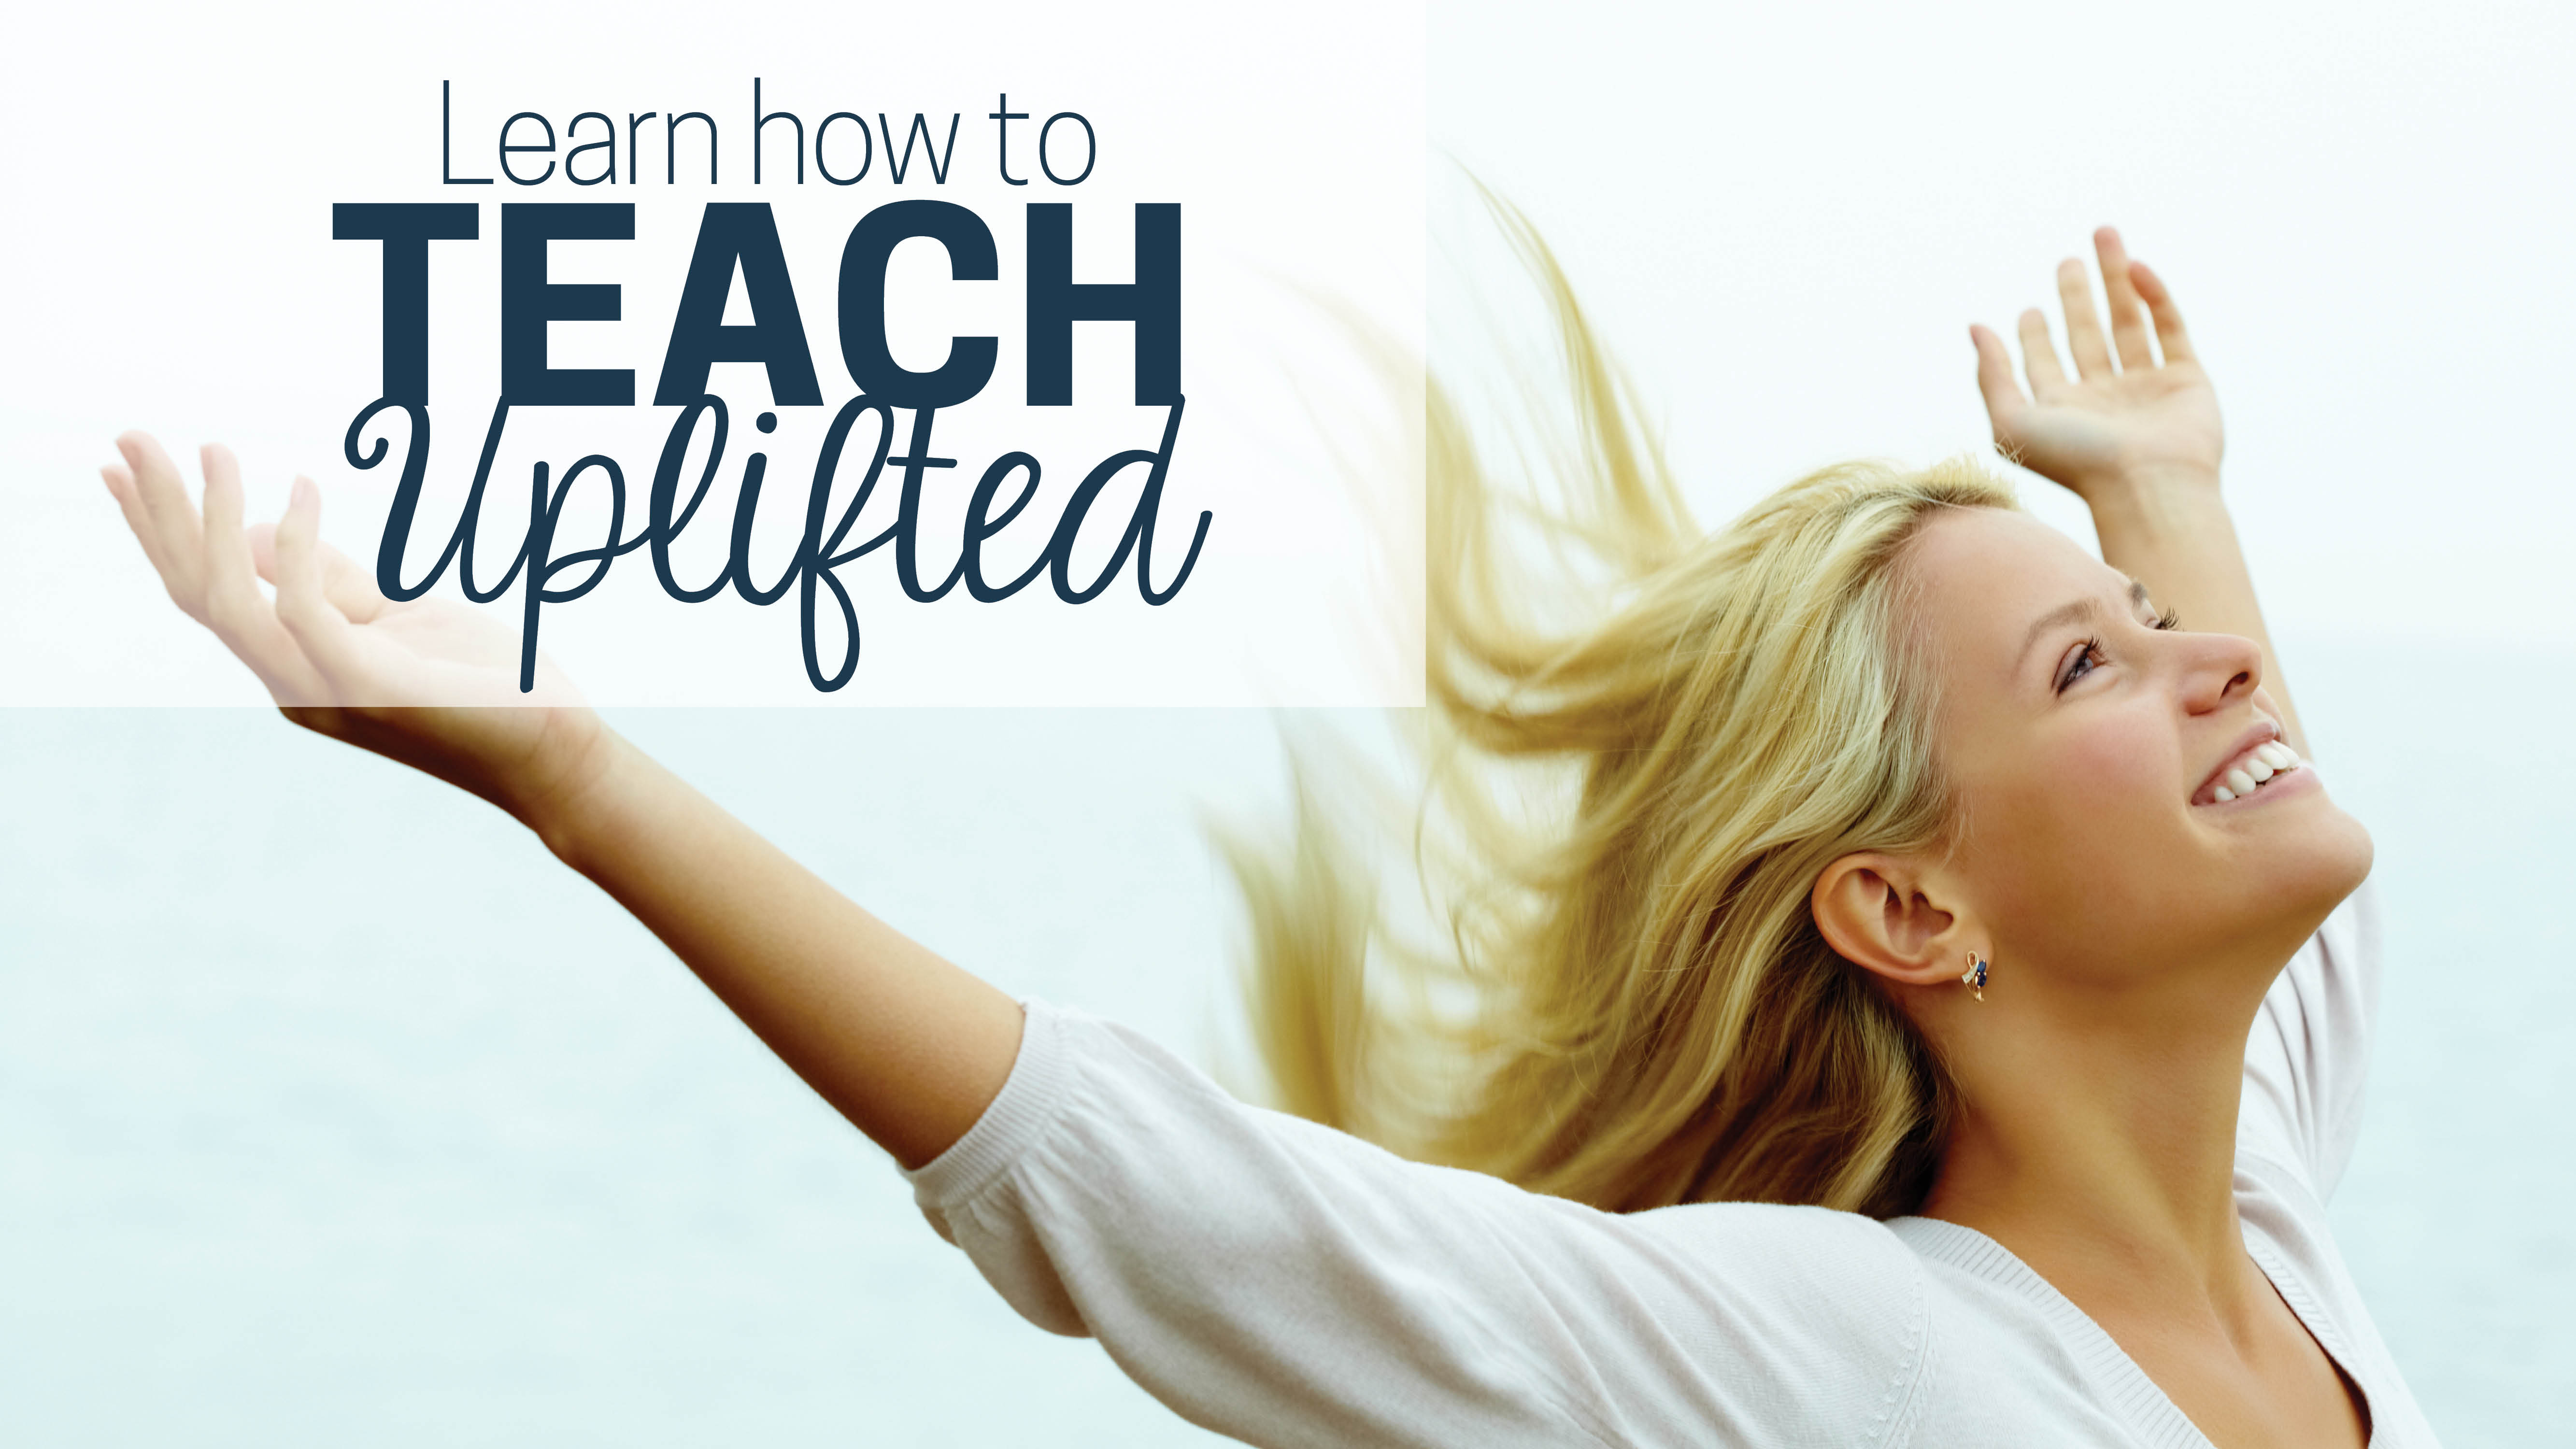 Learn how to teach uplifted